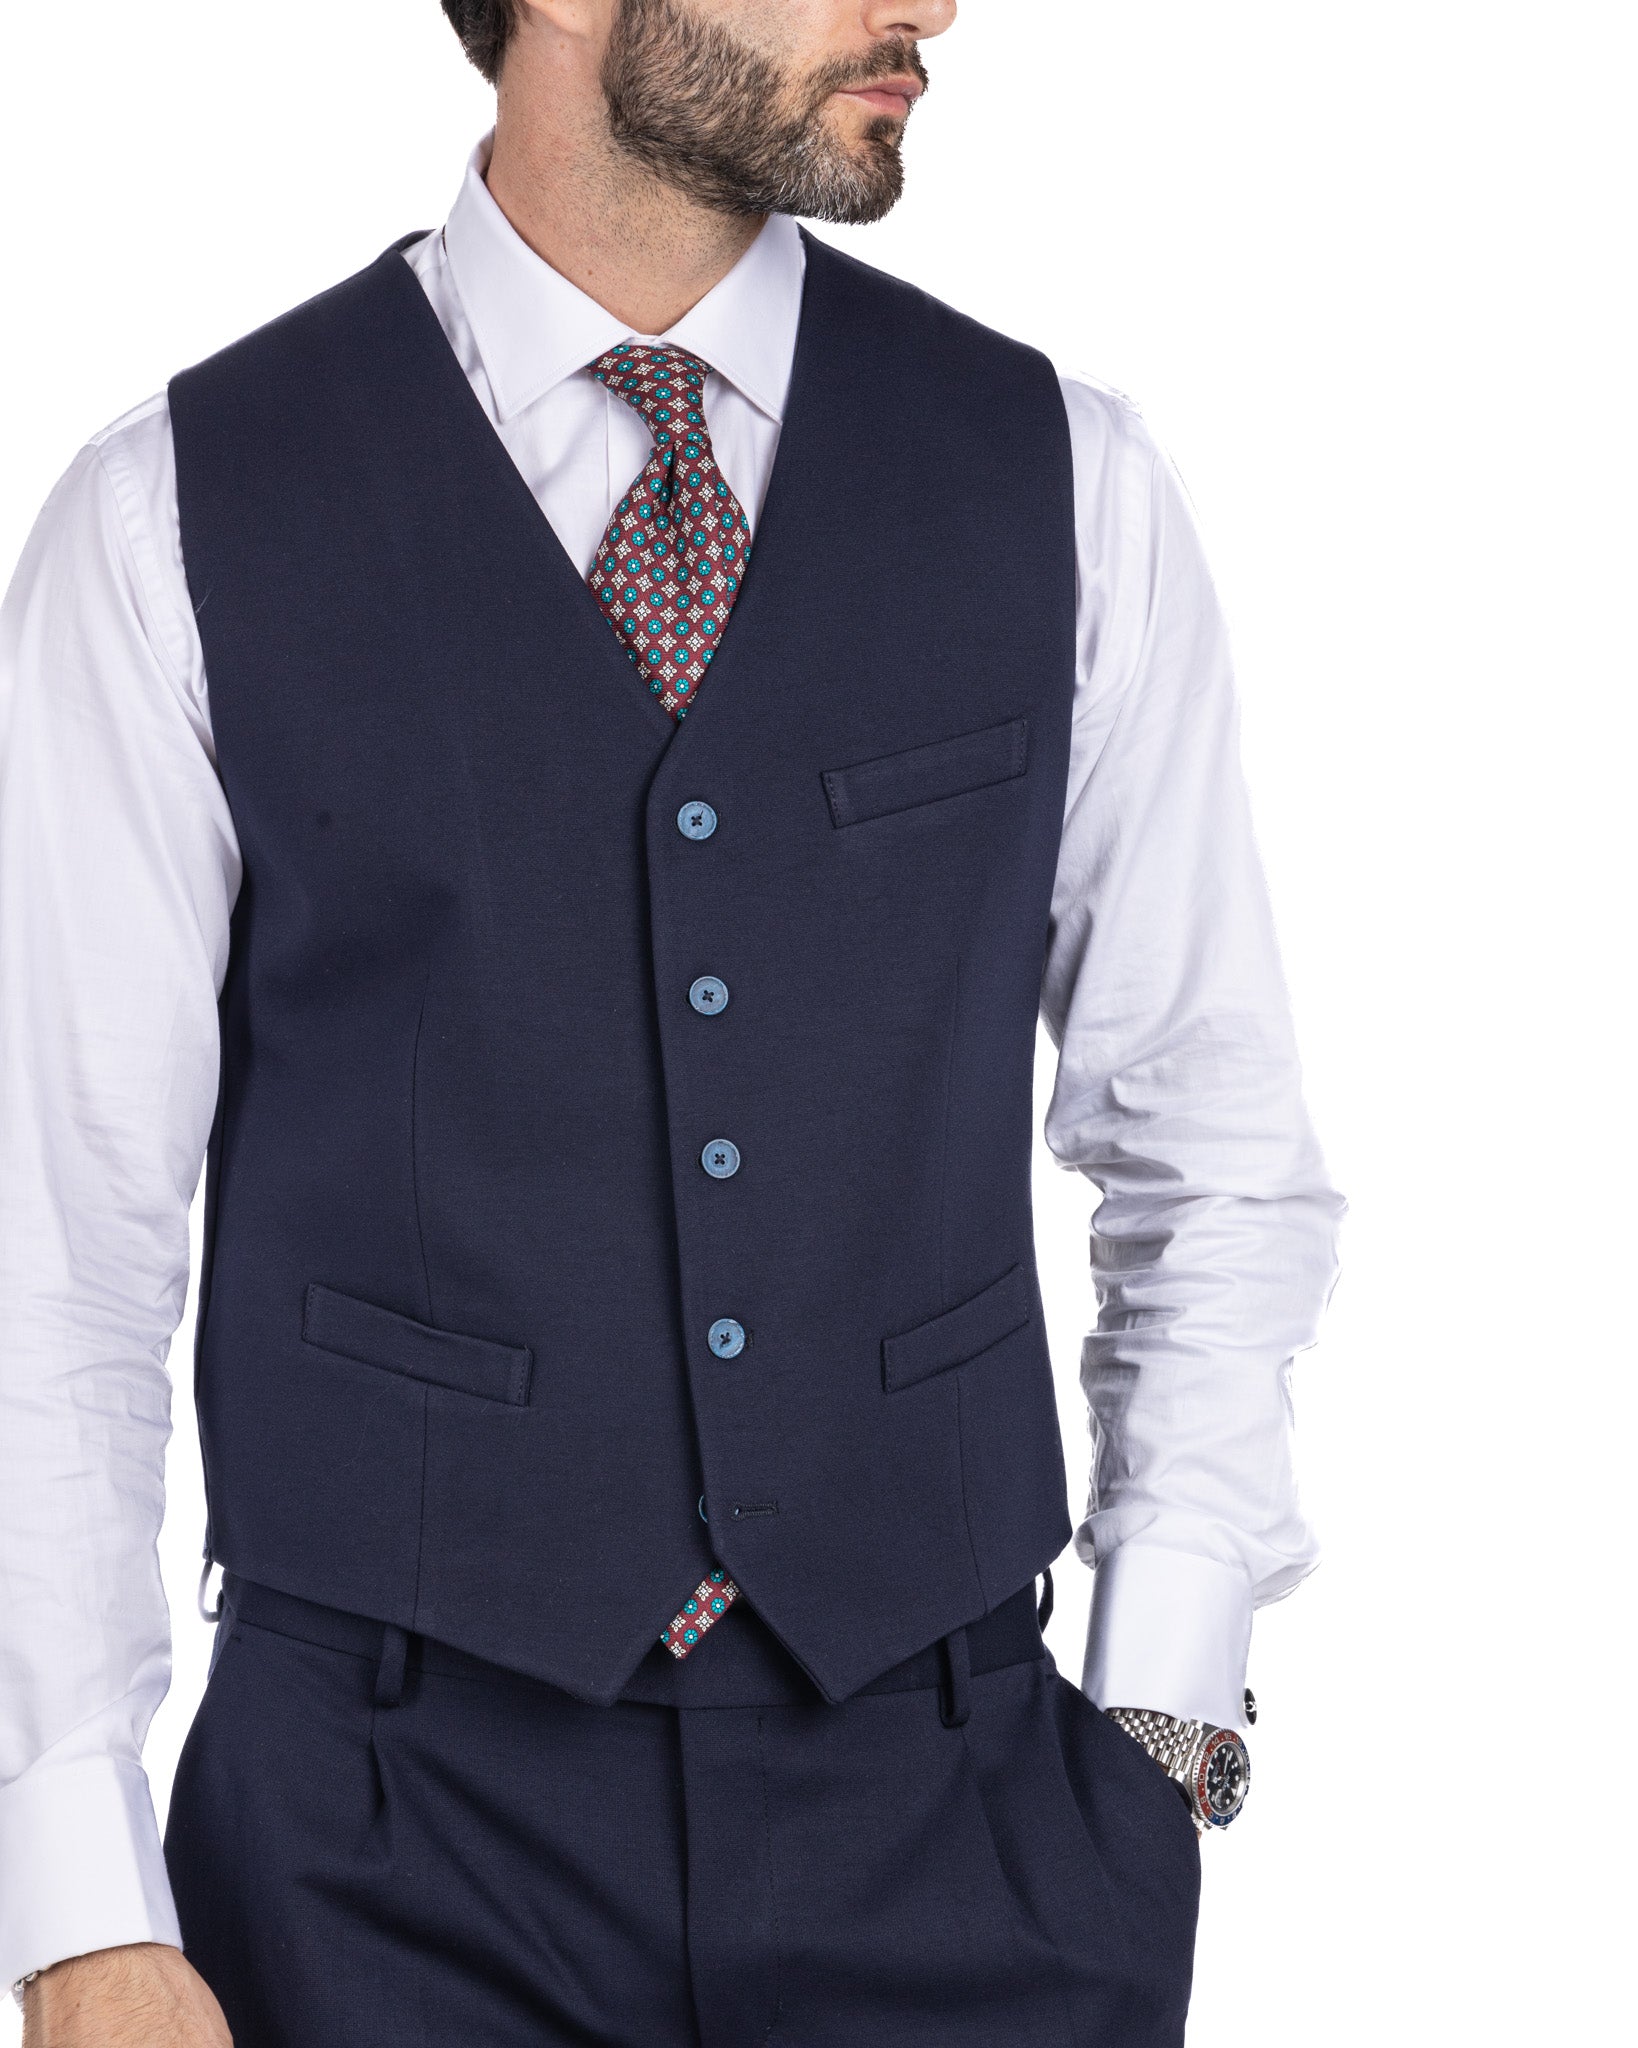 Mustang - single-breasted waistcoat in blue Milan stitch